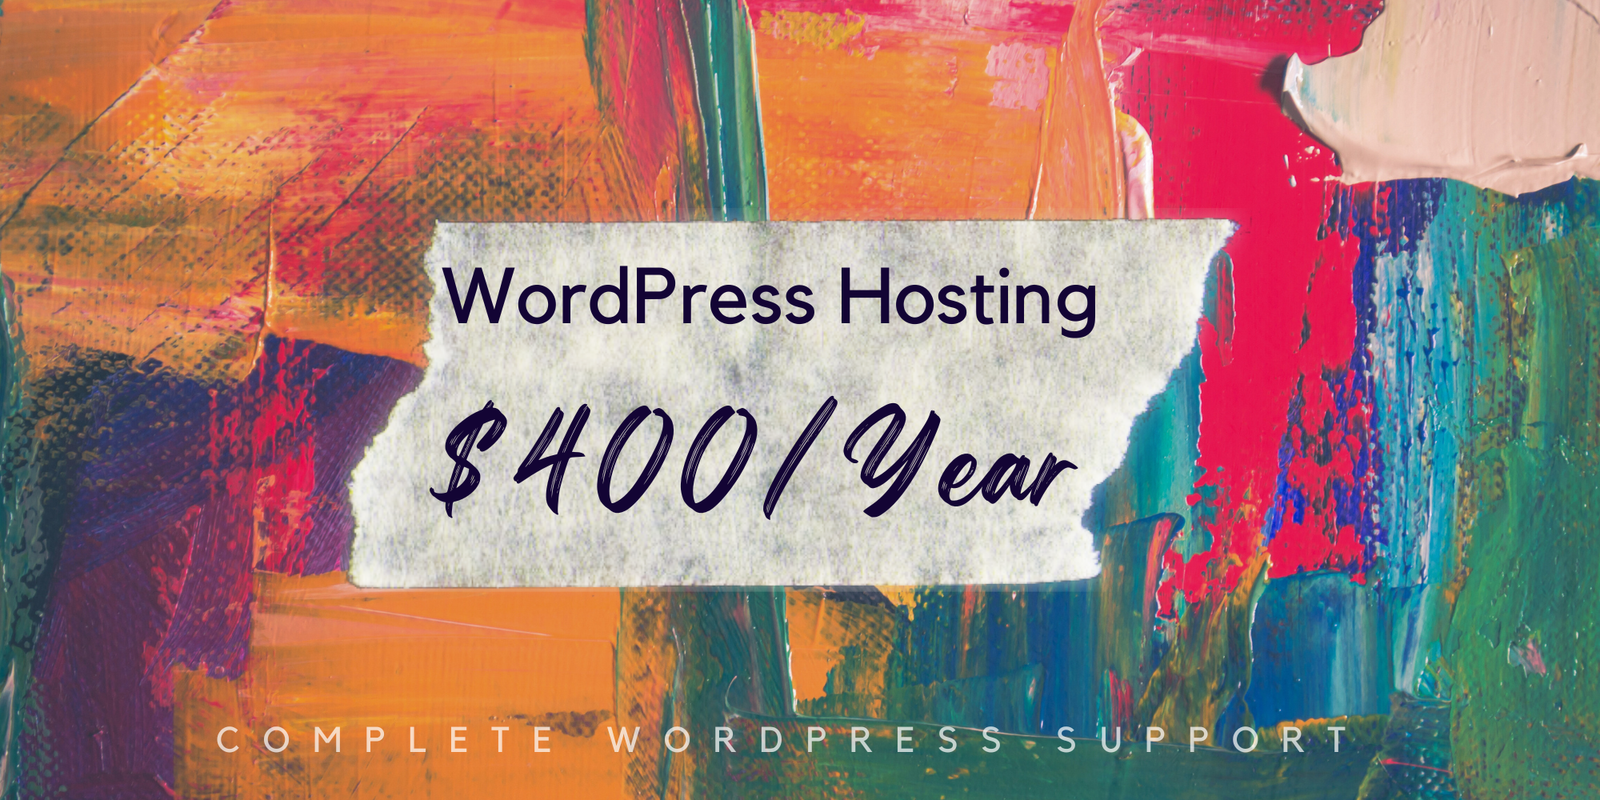 Welcome to Affordable WordPress Hosting and Expert Support!